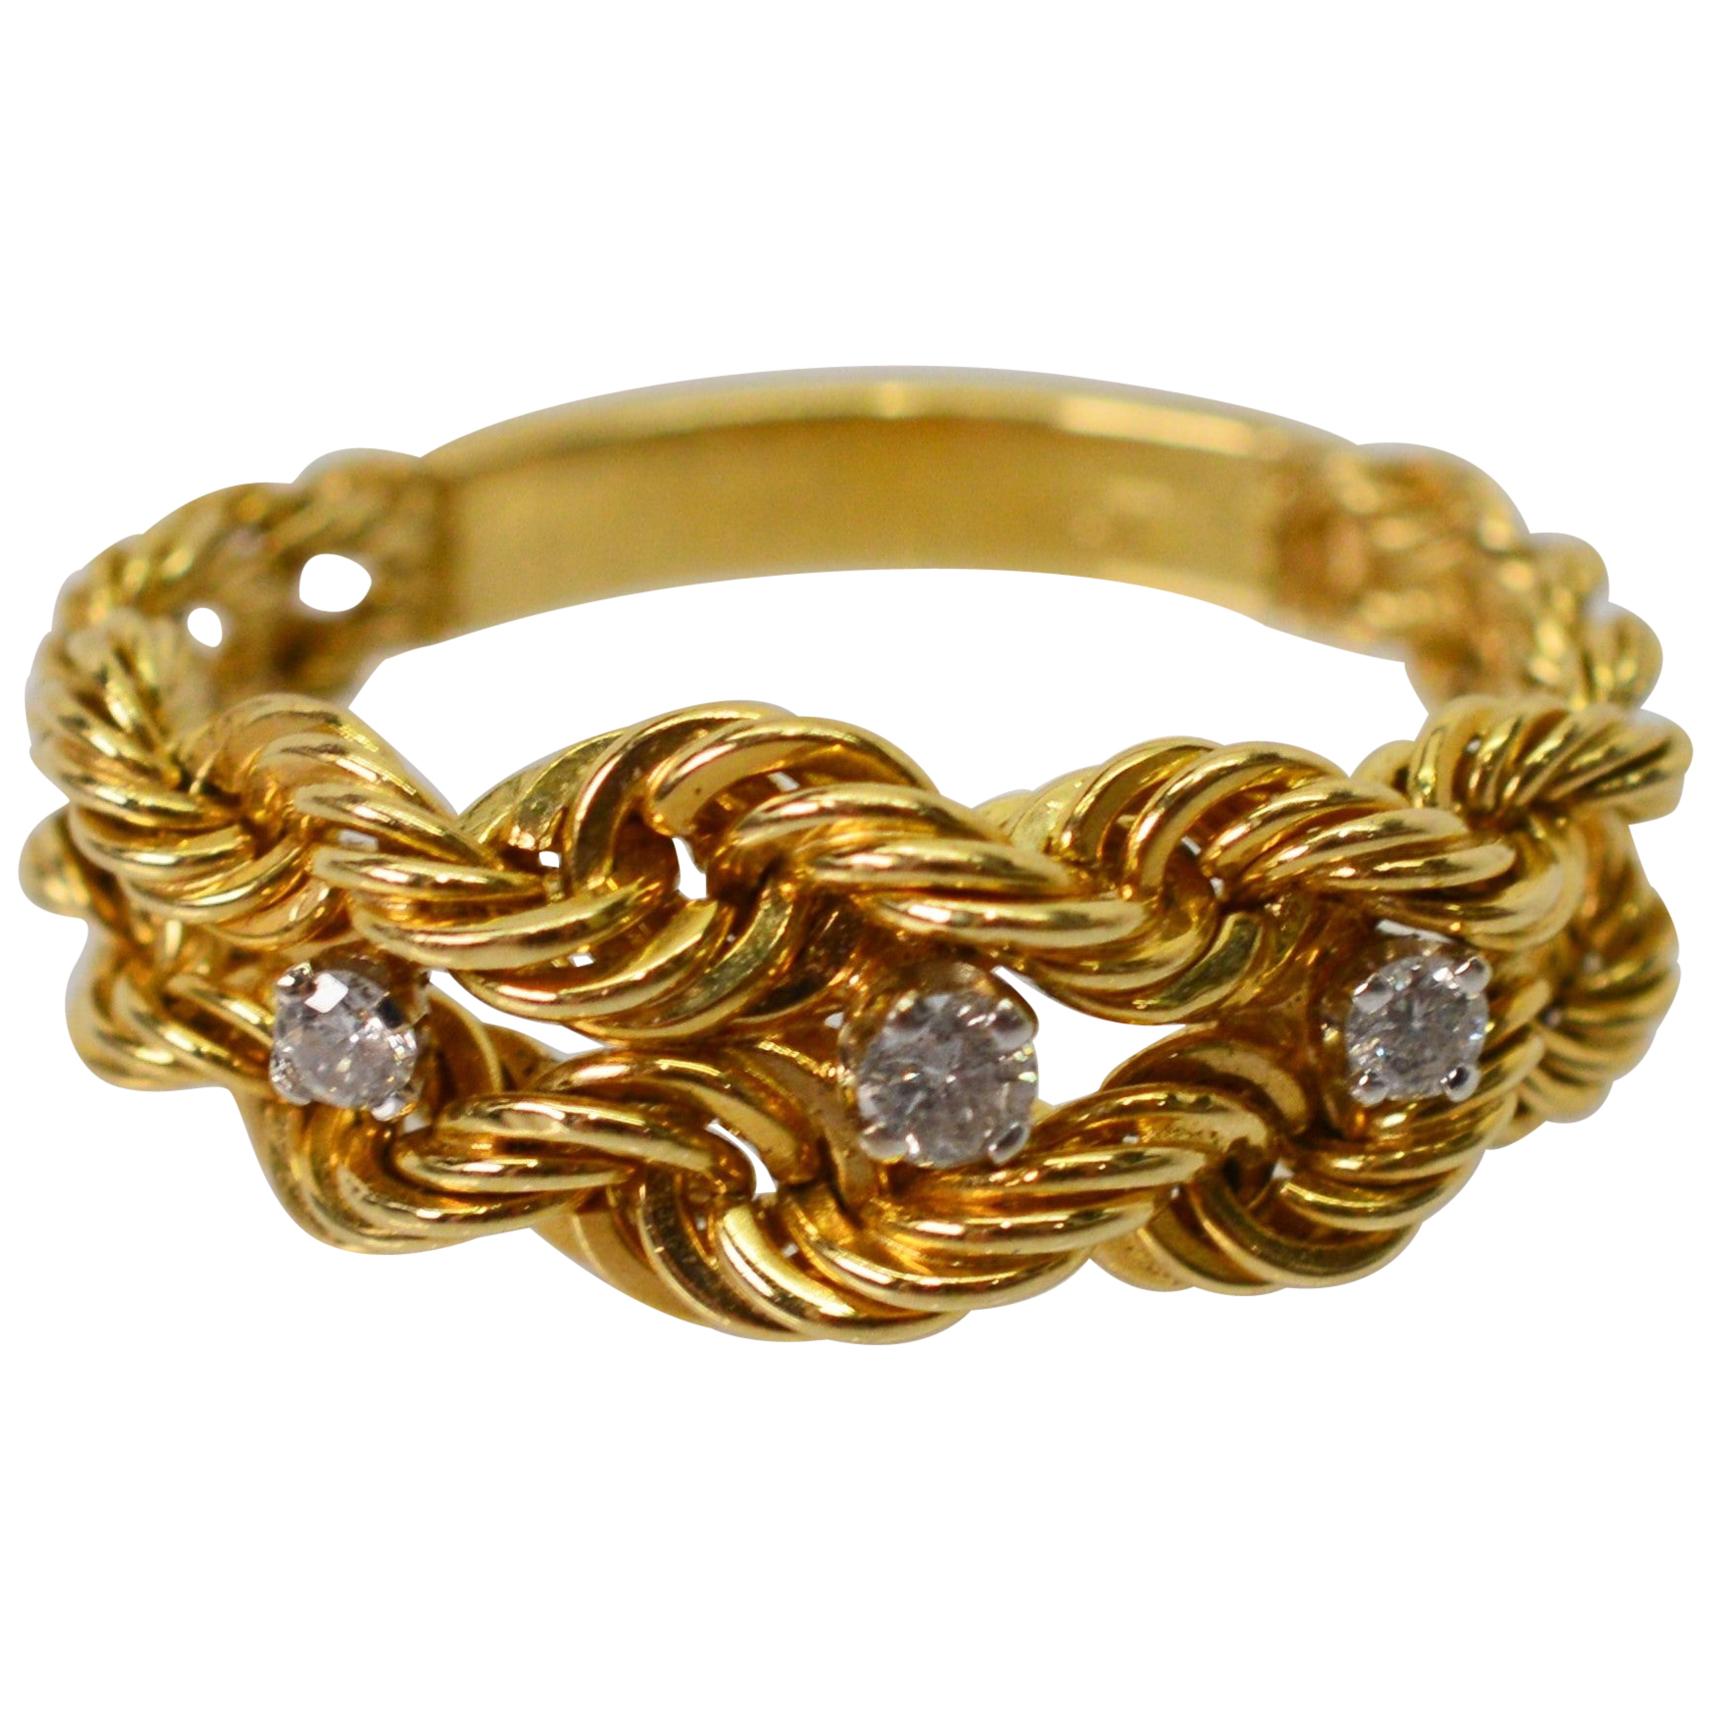 14 Karat Yellow Gold Braided Rope Chain Ring with Diamond Accents